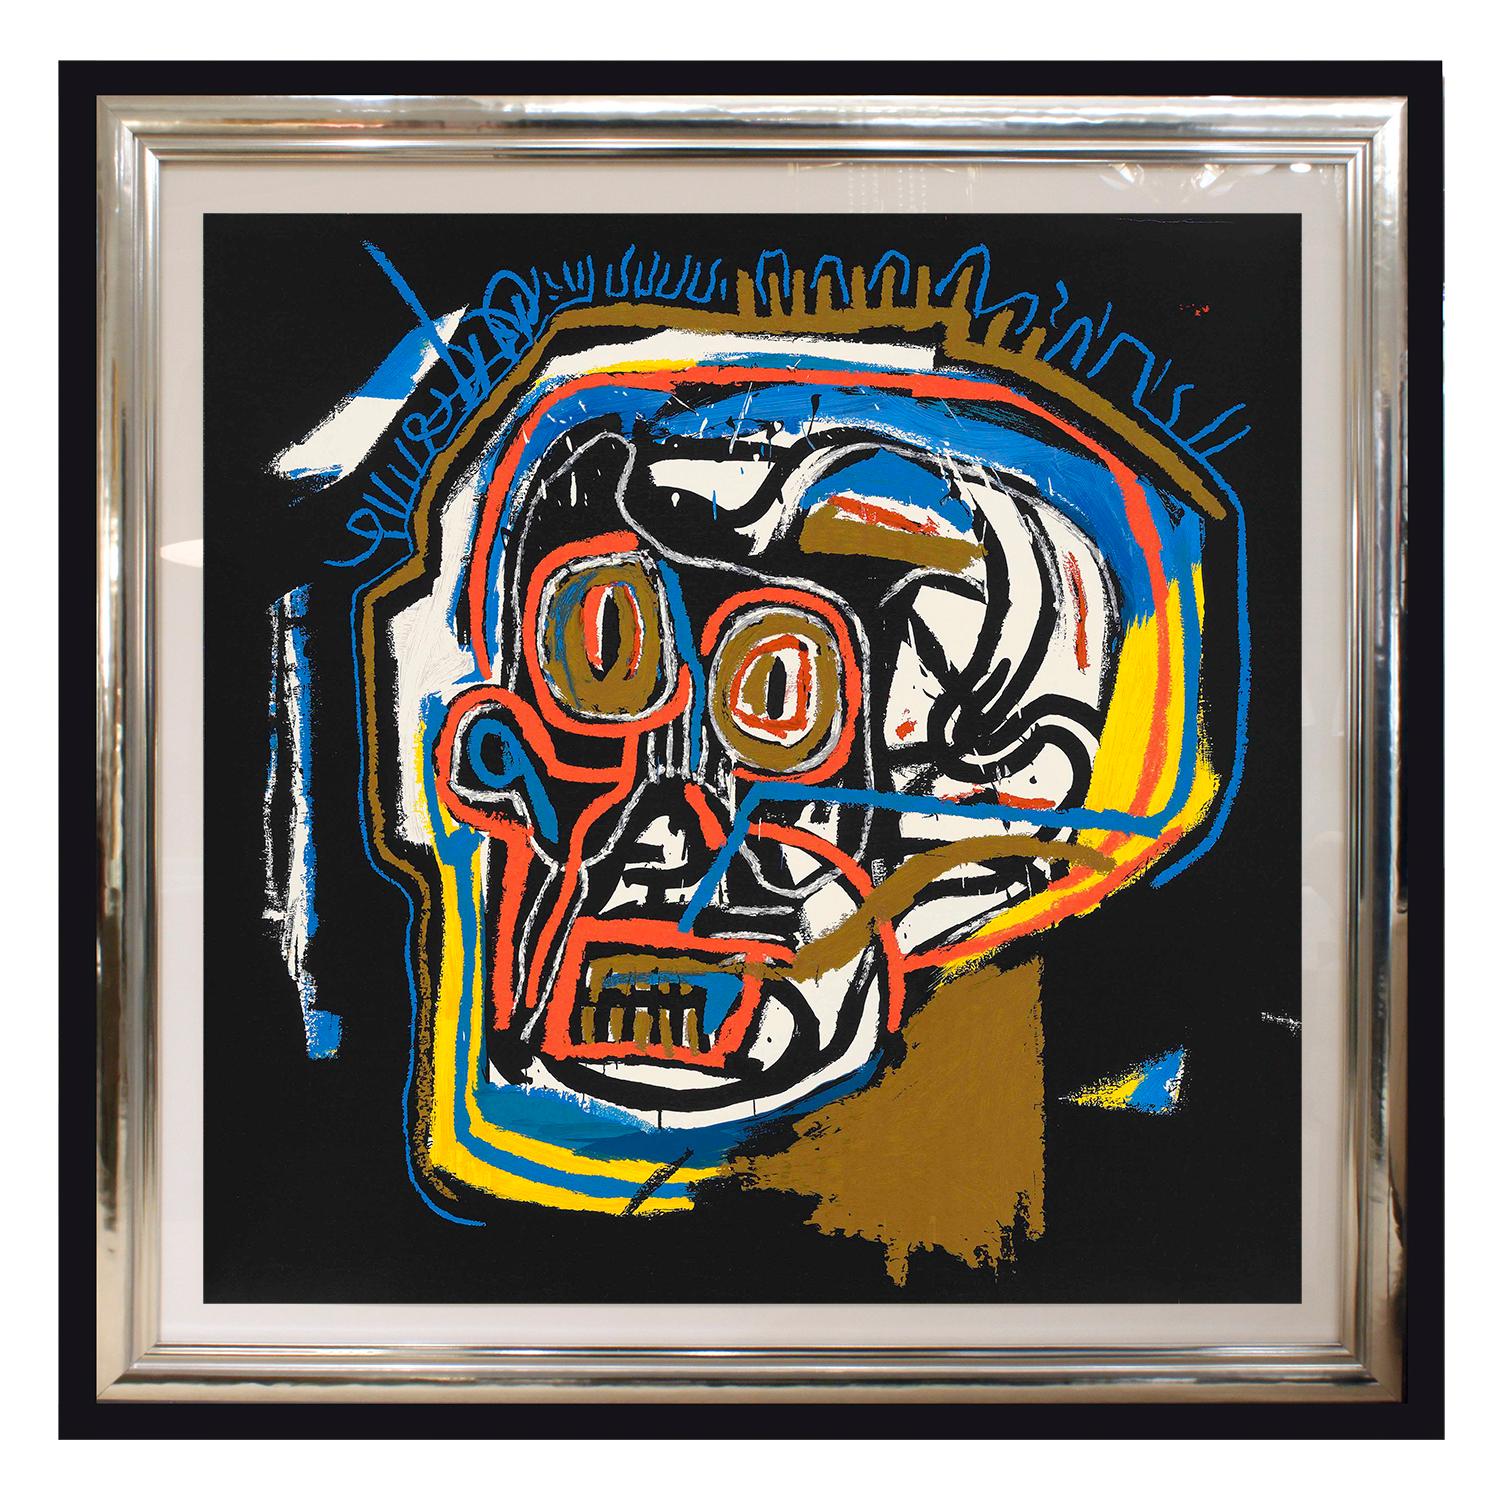 A collectors set of 4 screen prints, “Head”, “Rinso”, “Per Capita” and “Ernok” in colors, on wove paper, each full sheet, each one with matching number A.P. 4/15 in pencil on lower right and signed and dated on reverse “11-19-01” by Gerard Basquiat